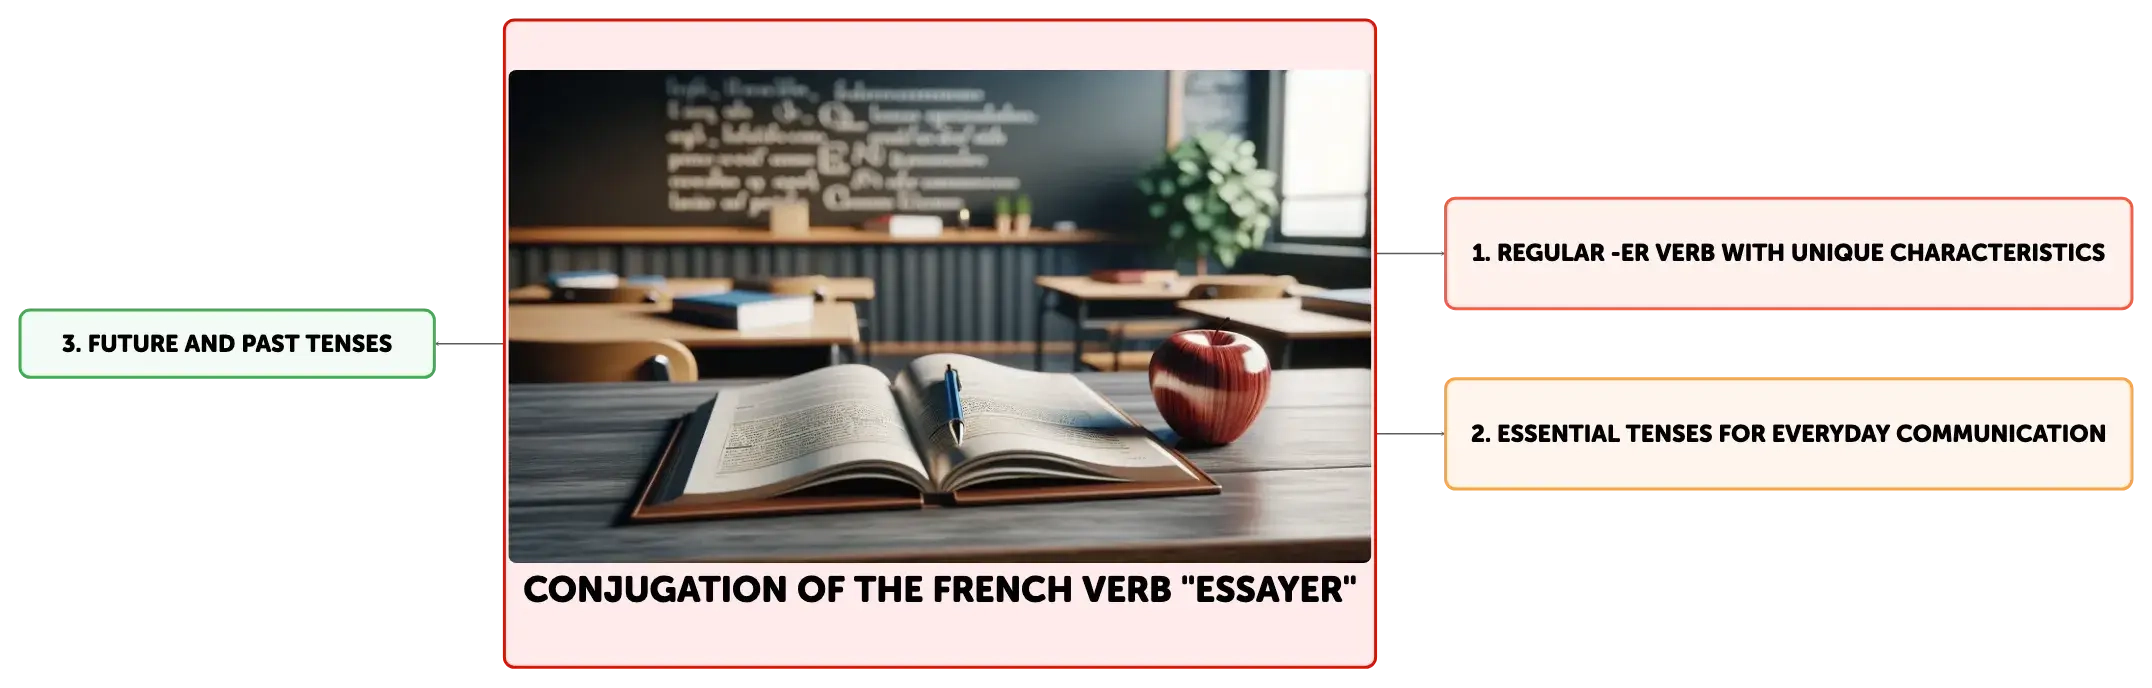 how to conjugate essayer verbs in french